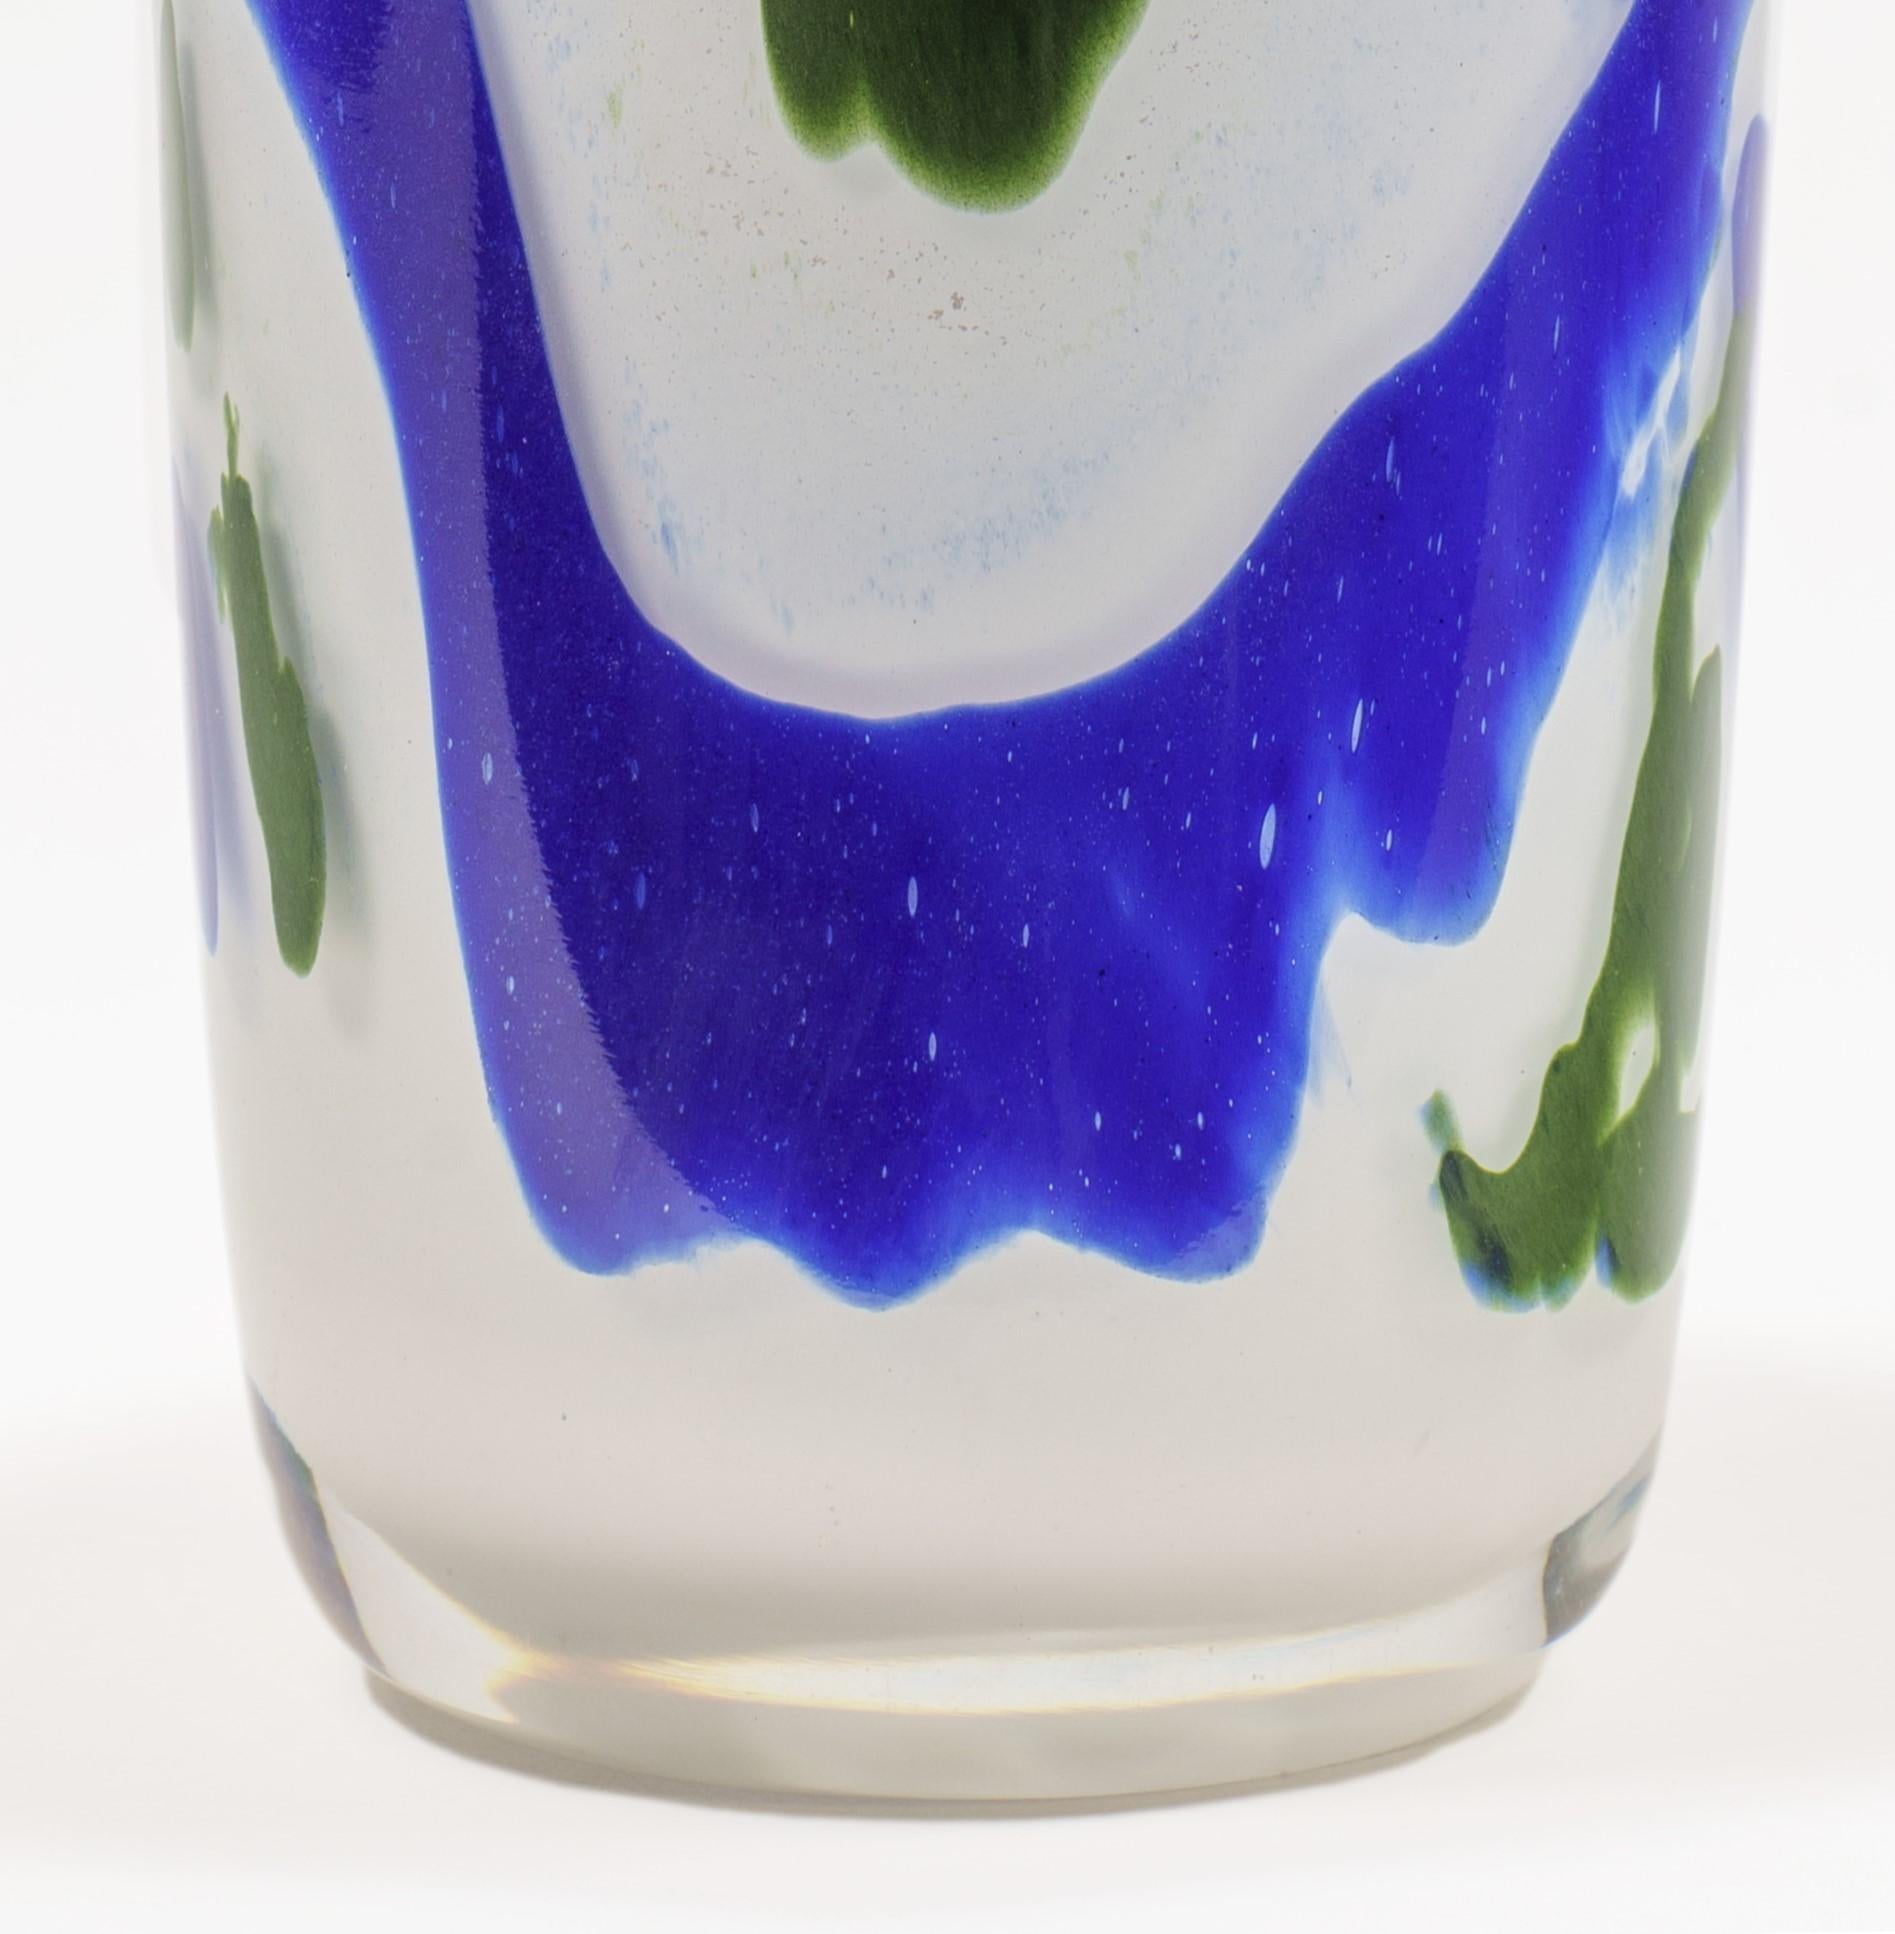 Jeremiah Jacobs is a highly skilled glass artist who has created a beautiful blown glass piece using blue and green swirls on a white background. The piece is a stunning example of the artistry and craftsmanship that goes into creating blown